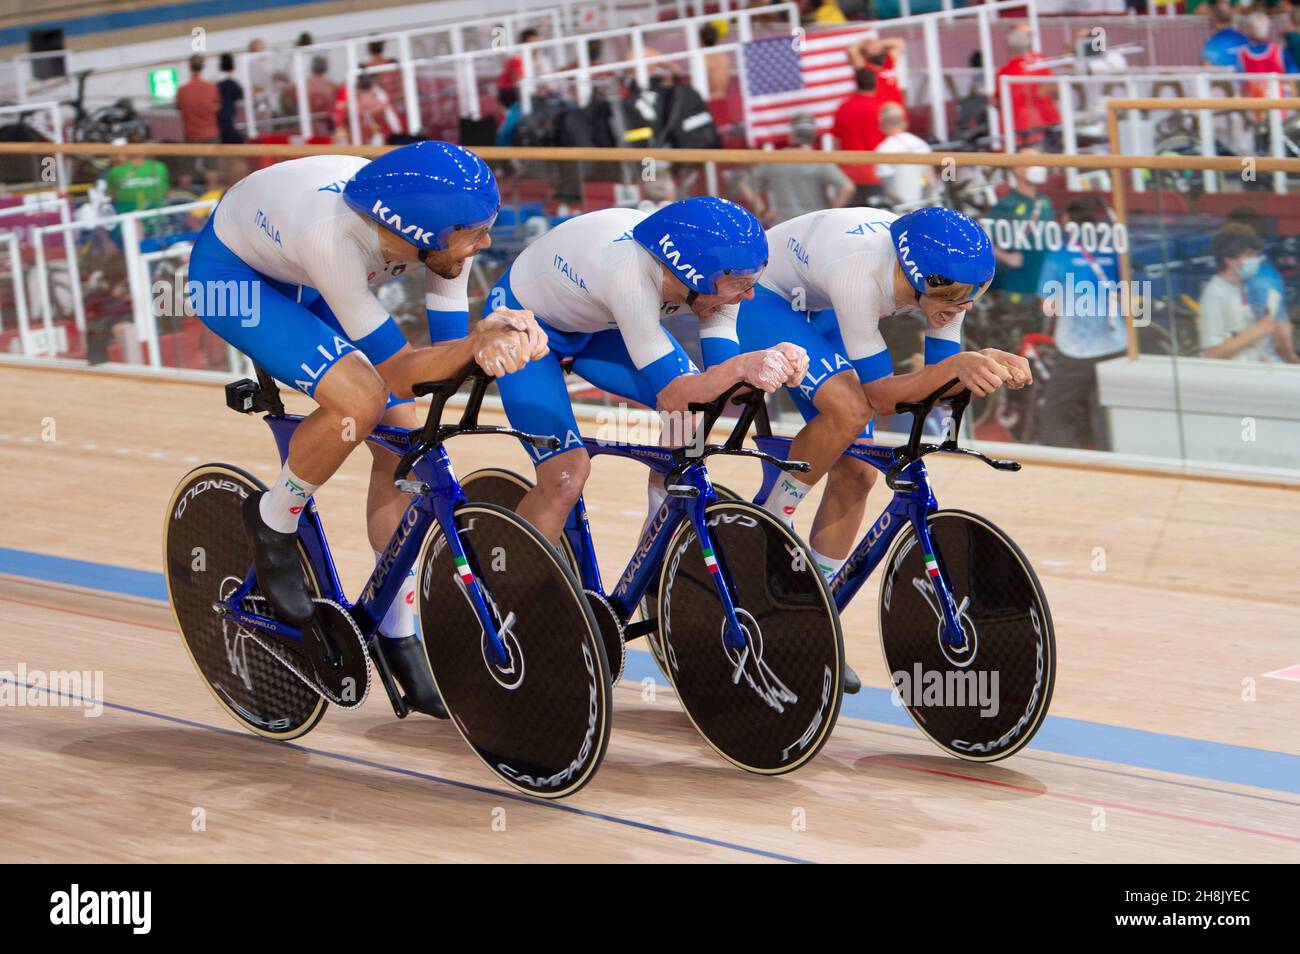 Italian Team pursuit, gold medalists on the track in the Tokyo 2020 Olympic Games.  Led by world champion Filippo Ganna. Stock Photo